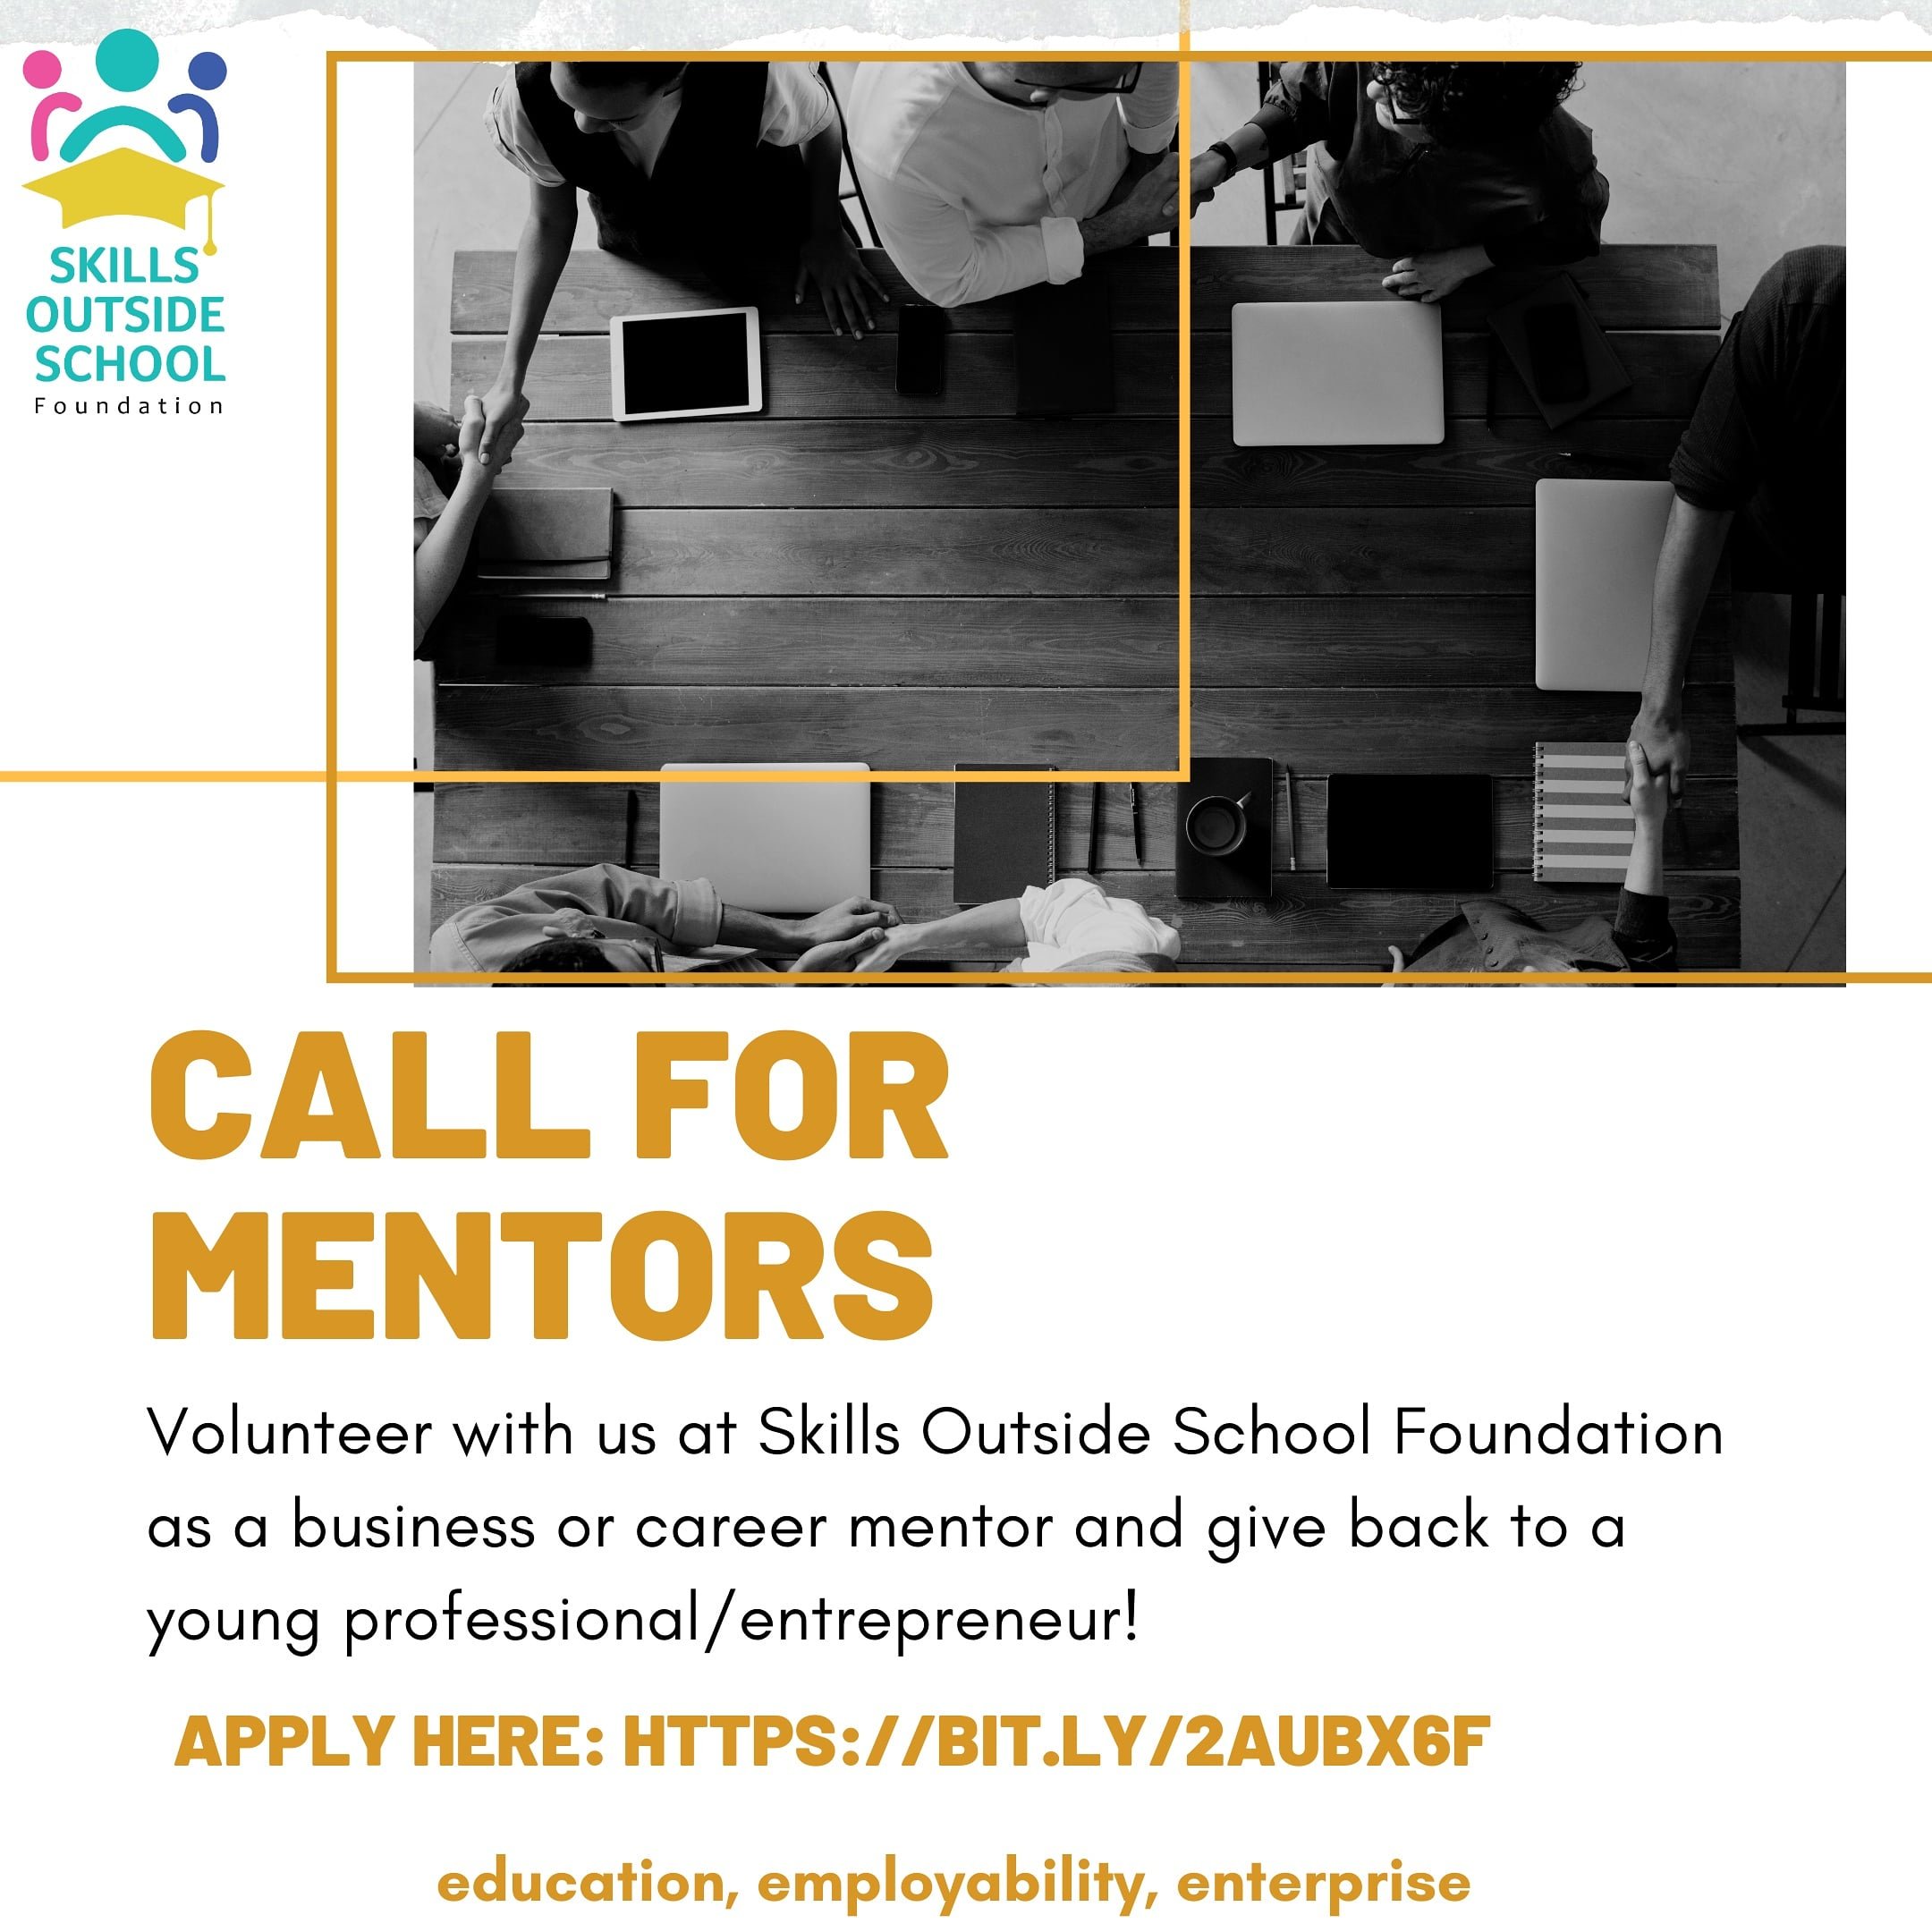 Skills Outside School Foundation on Twitter: "We another opportunity for you give back! Last month, put out a general call for volunteers and received over 1000 applications within a